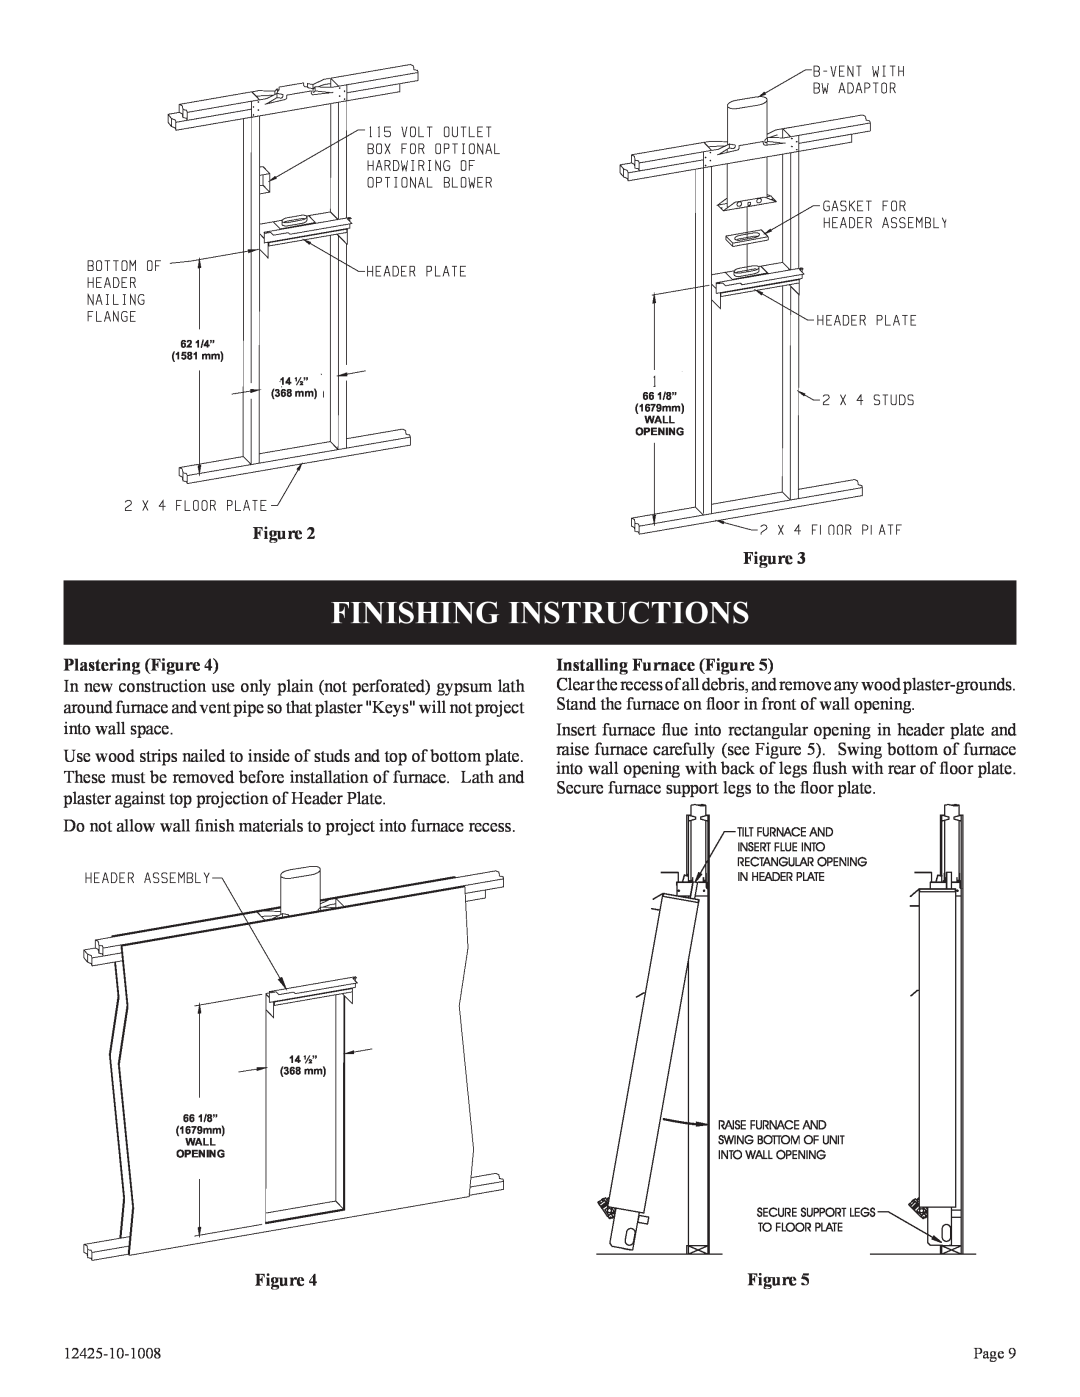 Empire Products GWT-35-2(SG, GWT-25-2(SG Finishing Instructions, Plastering Figure, Installing Furnace Figure 